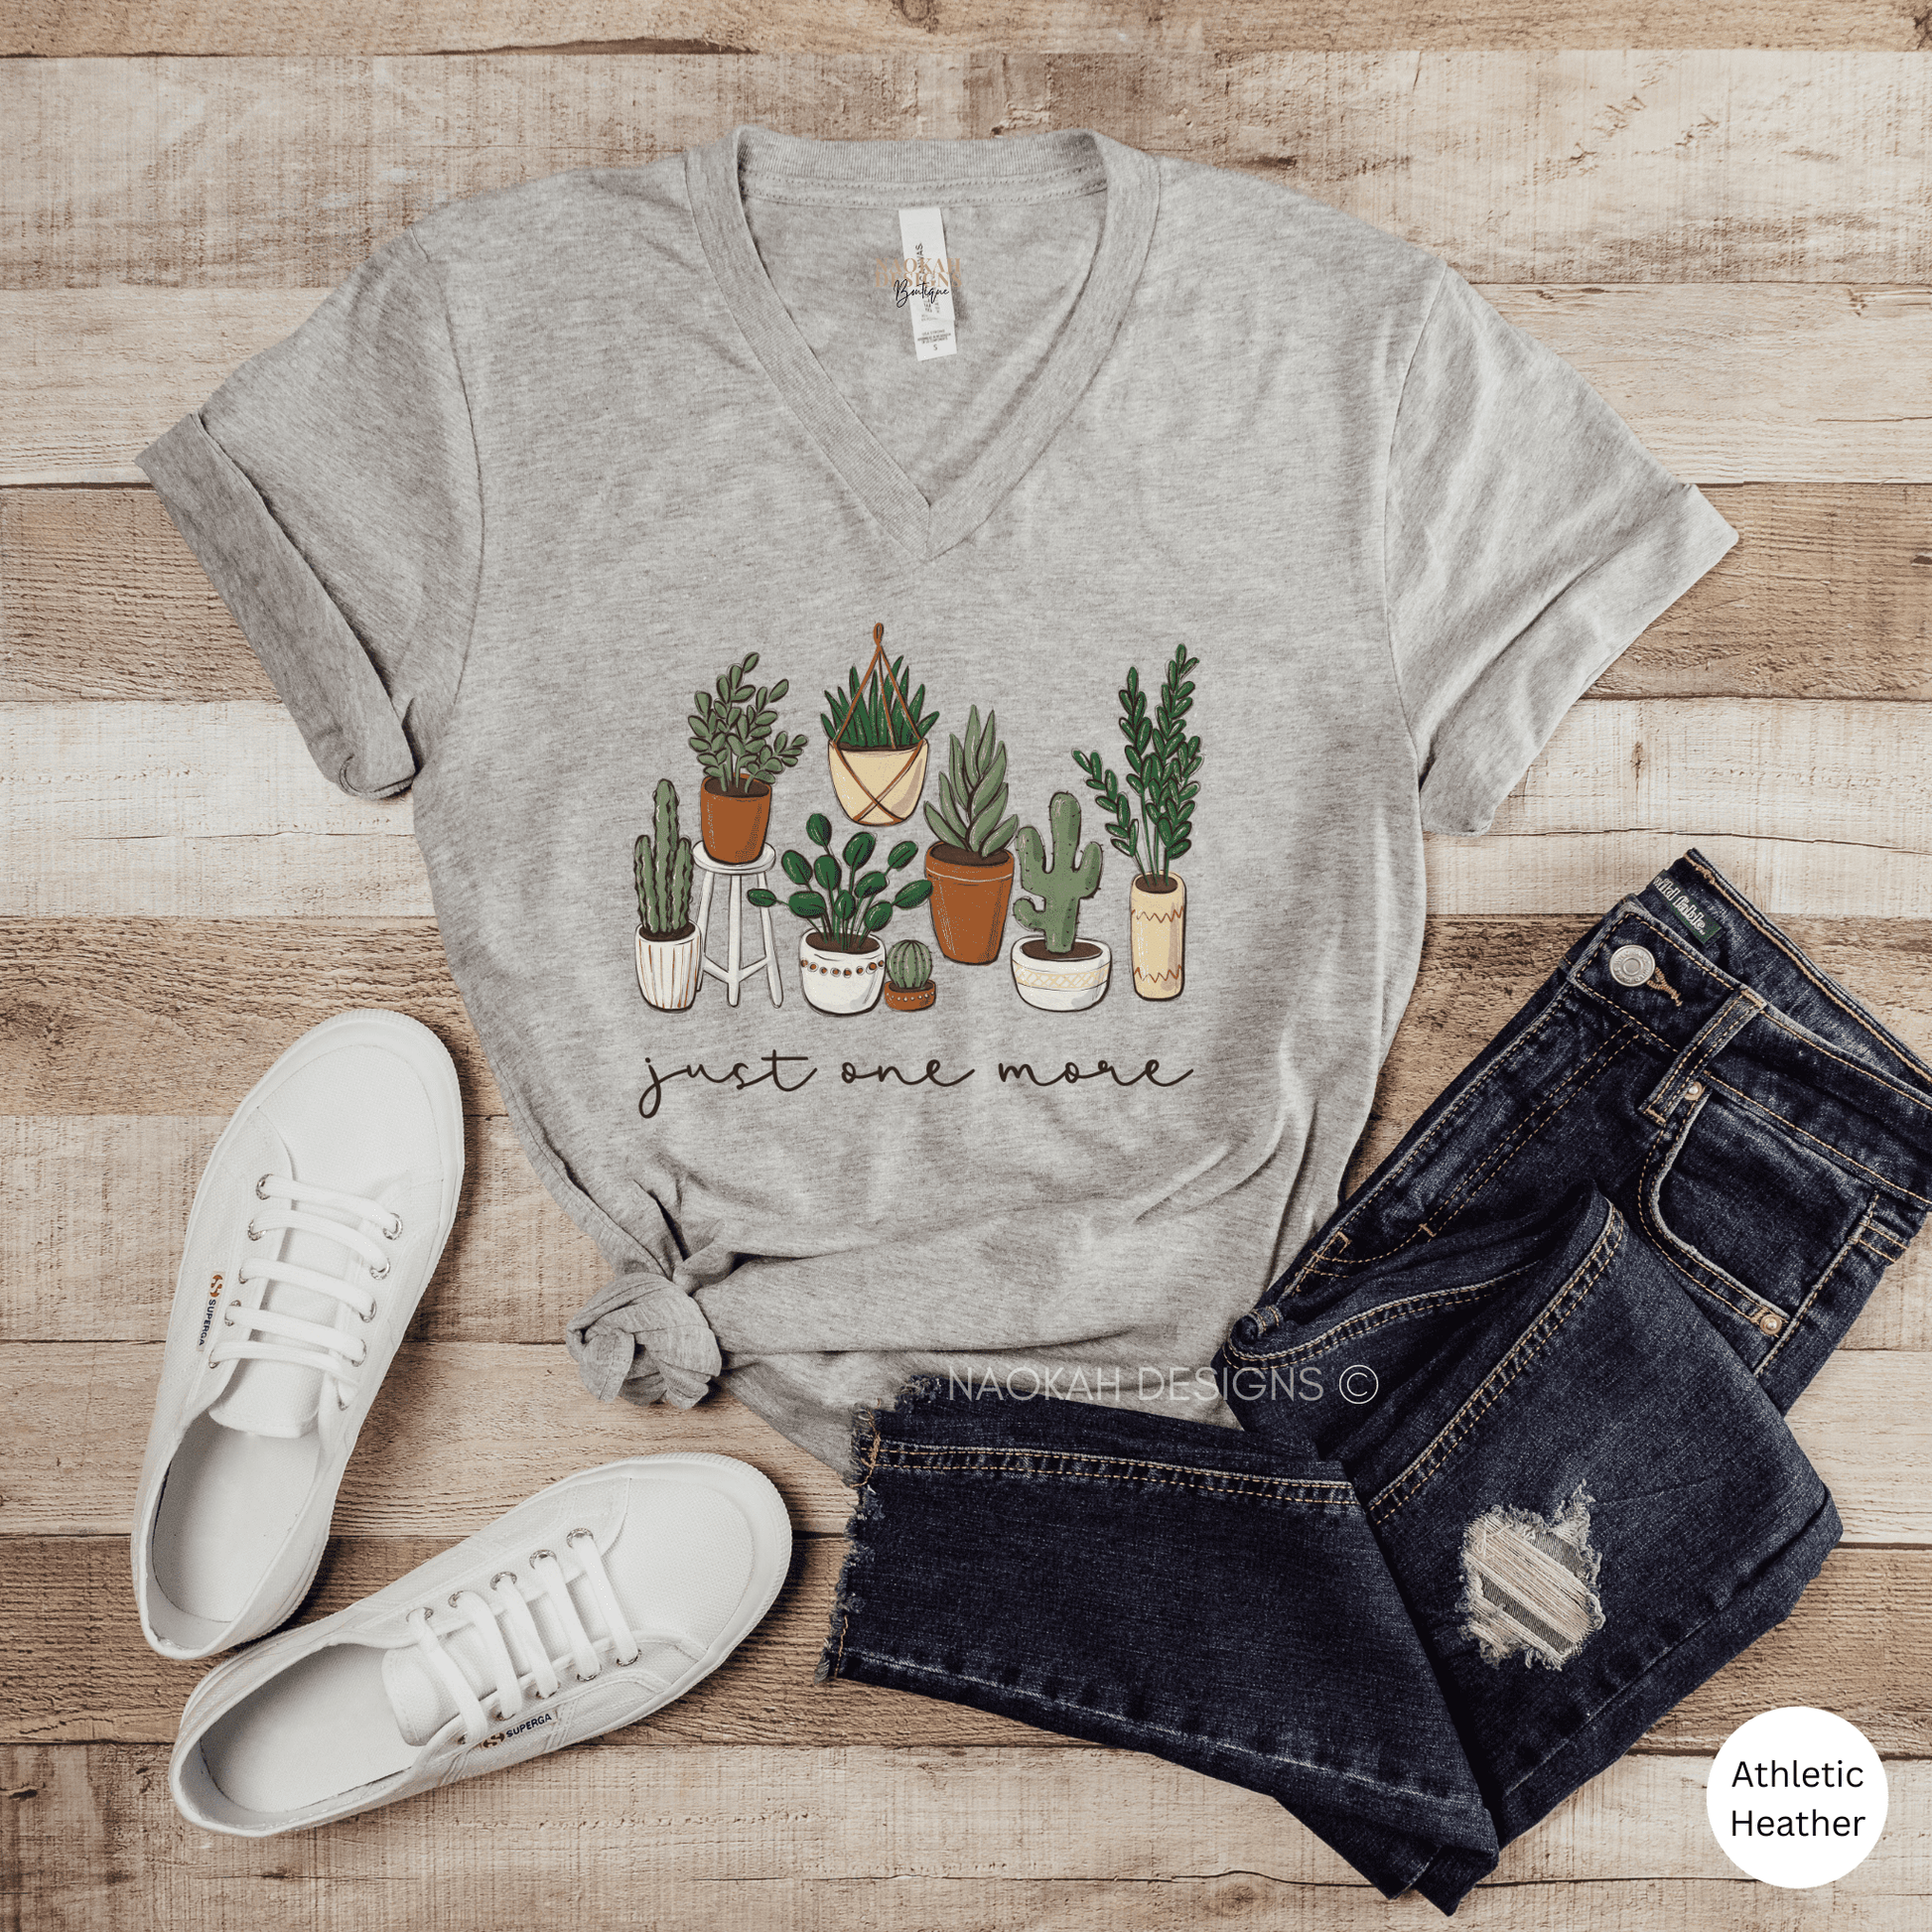 Just One More Plant Shirt Gift for Plant Mom Plant Momma Shirt